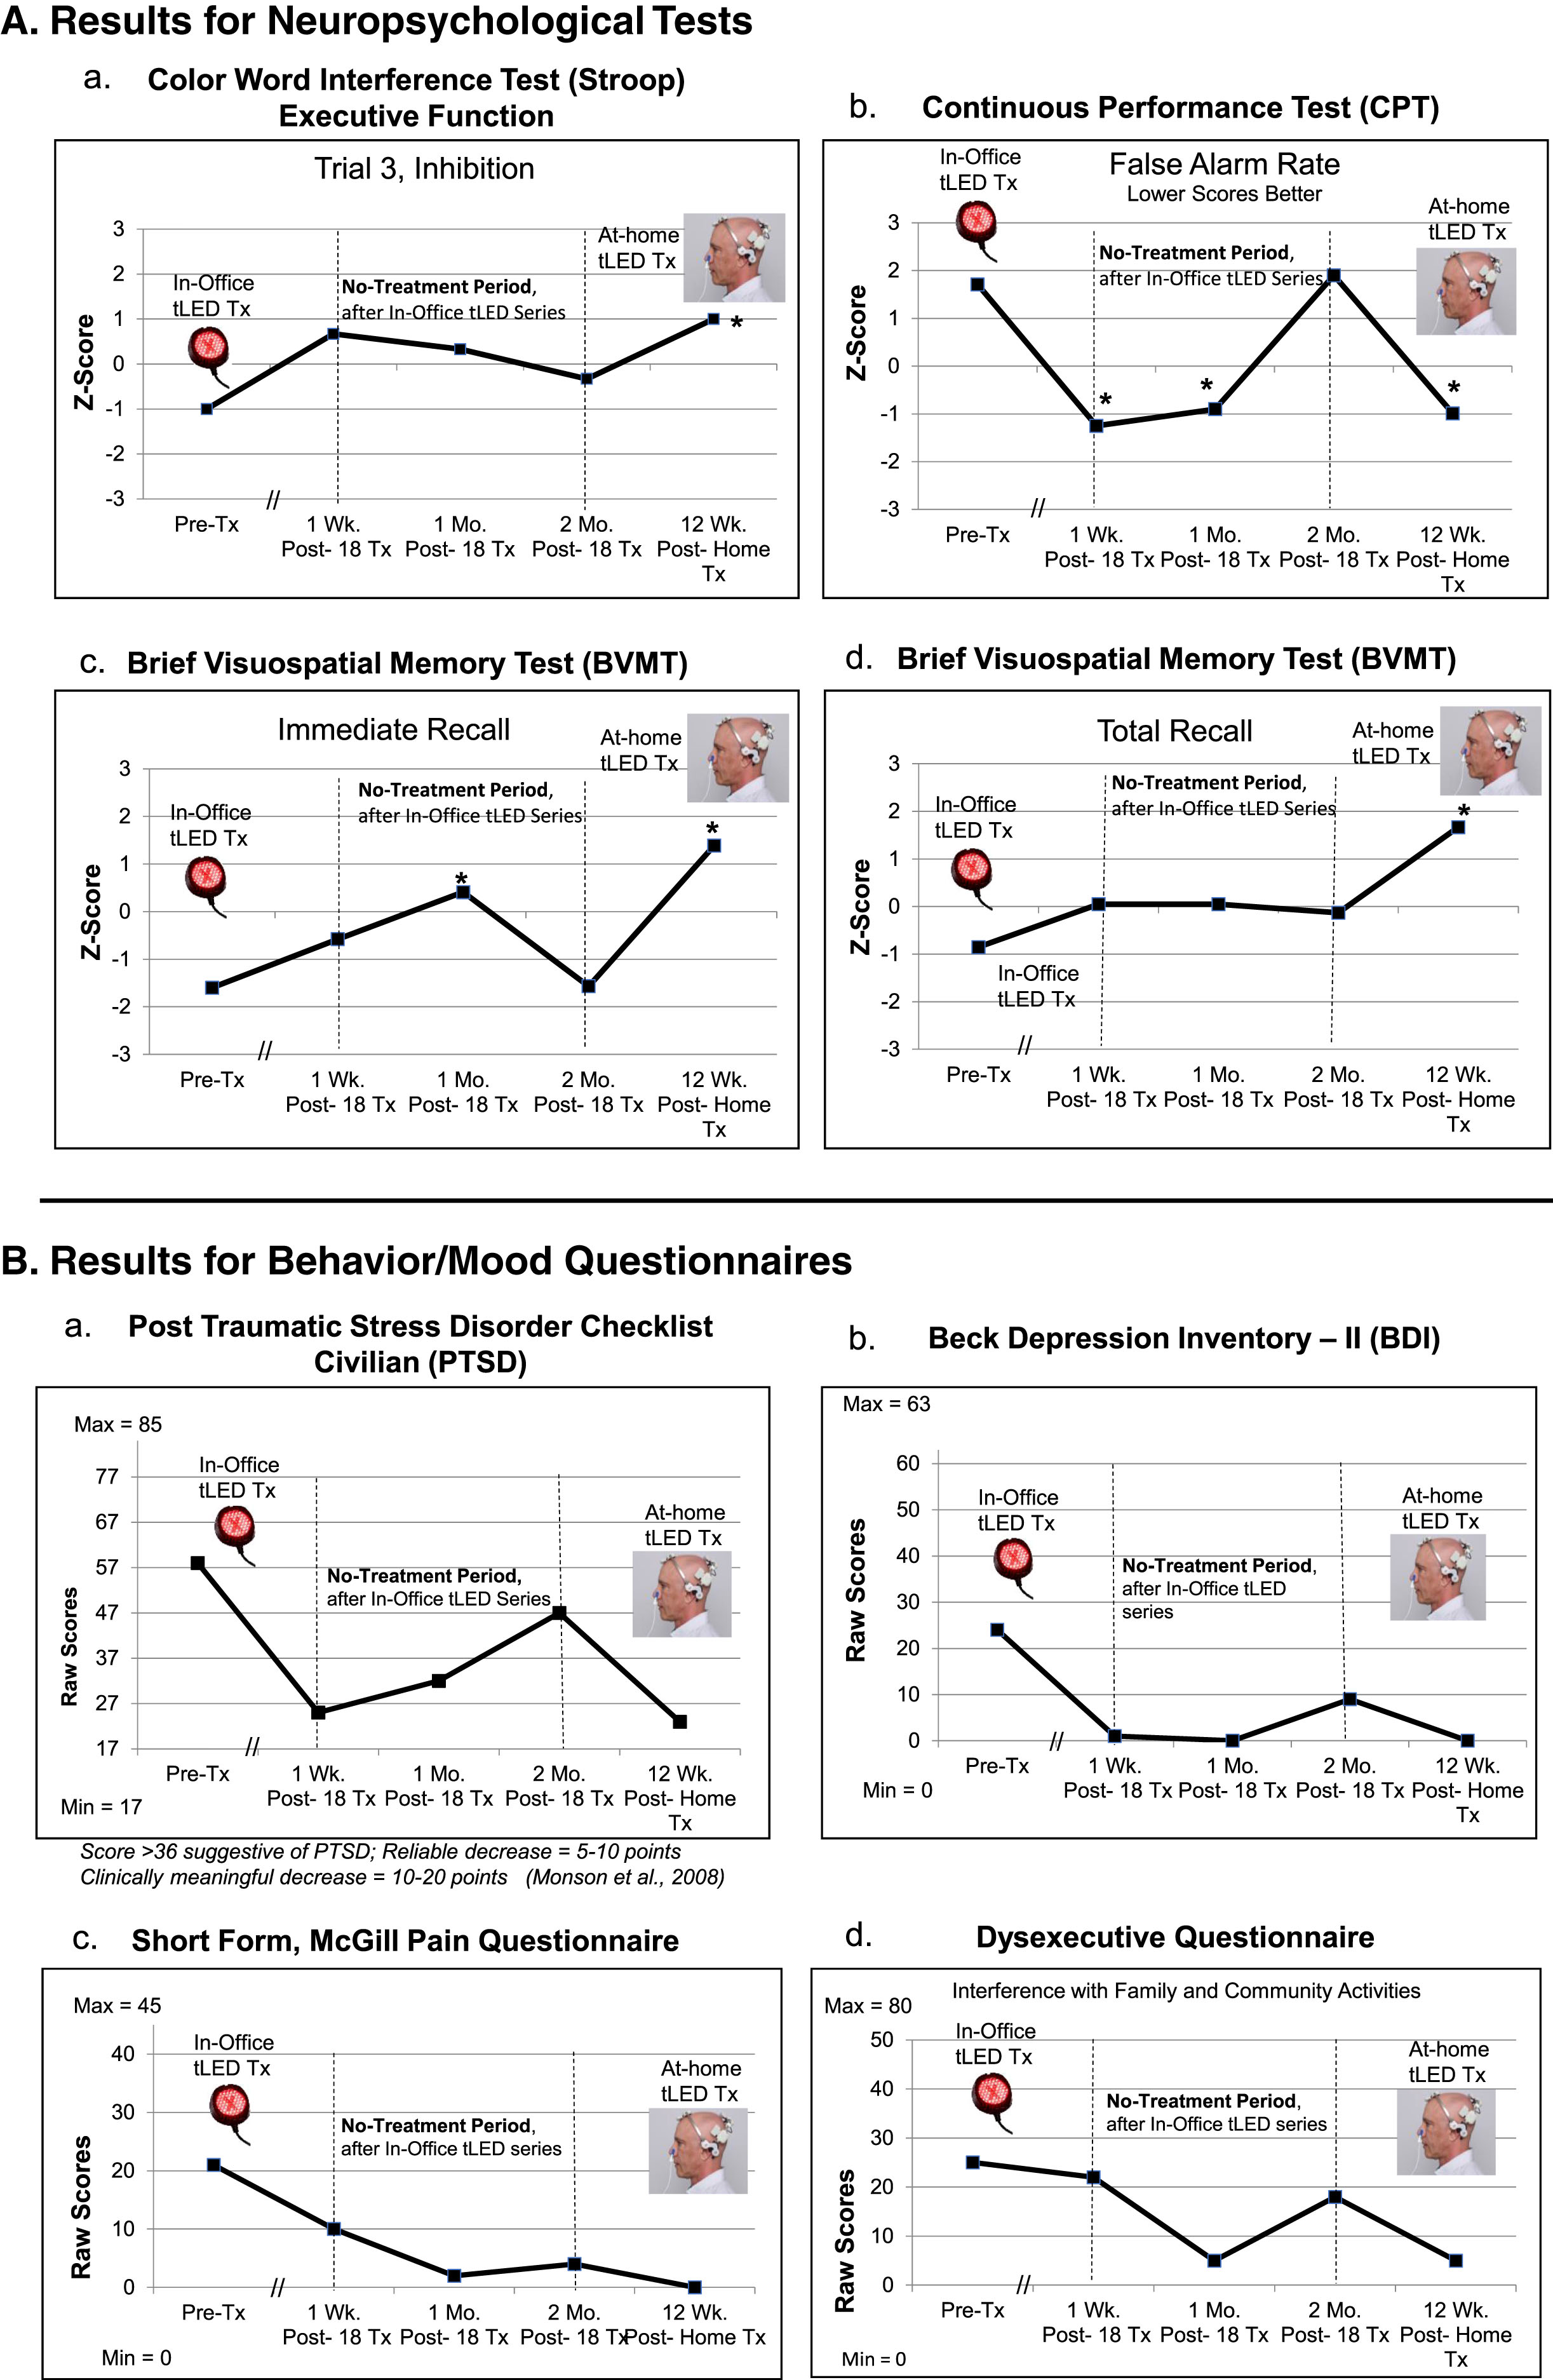 P1, cognitive and behavior/mood results. A) Z-Score graphs for some NP tests (Stroop, CPT, BVMT) after the initial, In-office tPBM series (Protocol A); and the later, at-home series (Protocol B). B) Self-ratings for behavior/mood questionnaires after each series. These ratings showed a pattern similar to NP tests, e.g., improvements at 1 week or 1 month after initial series, but worsening 2 months later, especially, PTSD/PCL-C (a). Graphs show improved (lower) ratings after the 12-week, at-home series. See Supplementary Tables 3A and 3B. NP, neuropsychological; PTSD/PCL-C, Post-traumatic Stress Disorder Checklist, Civilian; the // refers to time period when 18 tPBM treatments were applied; *p < 0.05.